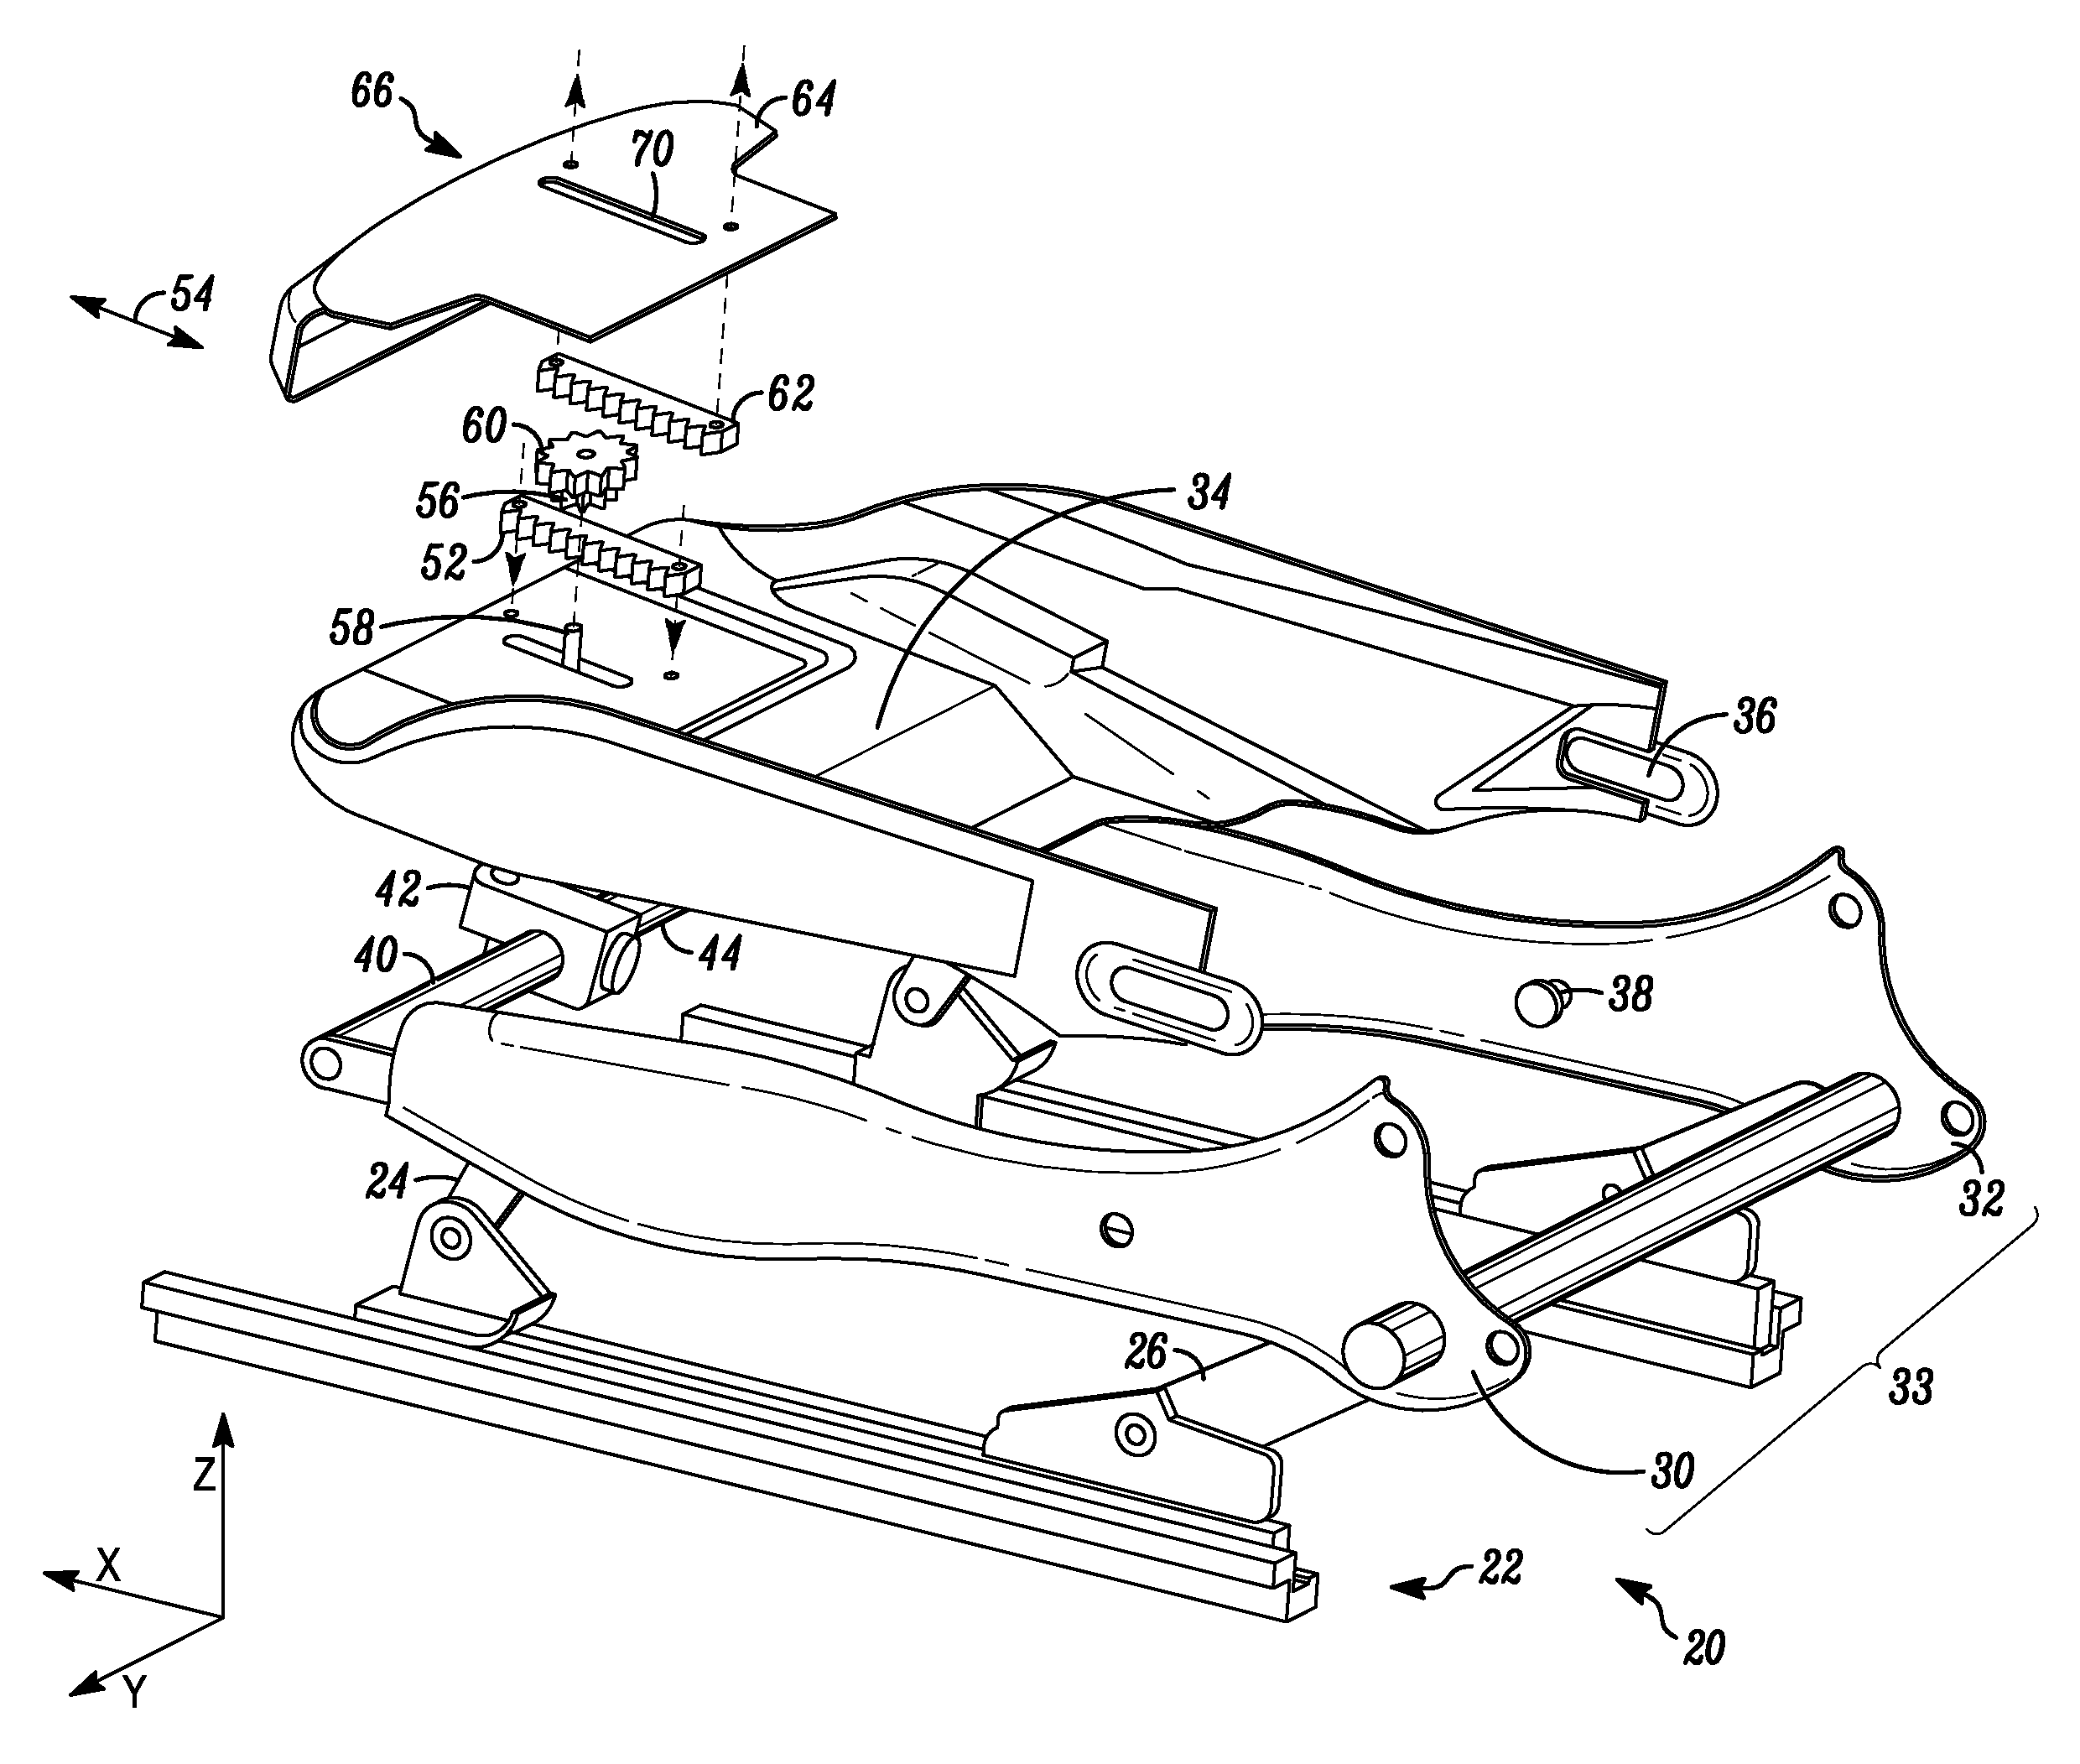 Seat-depth adjustable vehicle seat with a first seat part and a second seat part